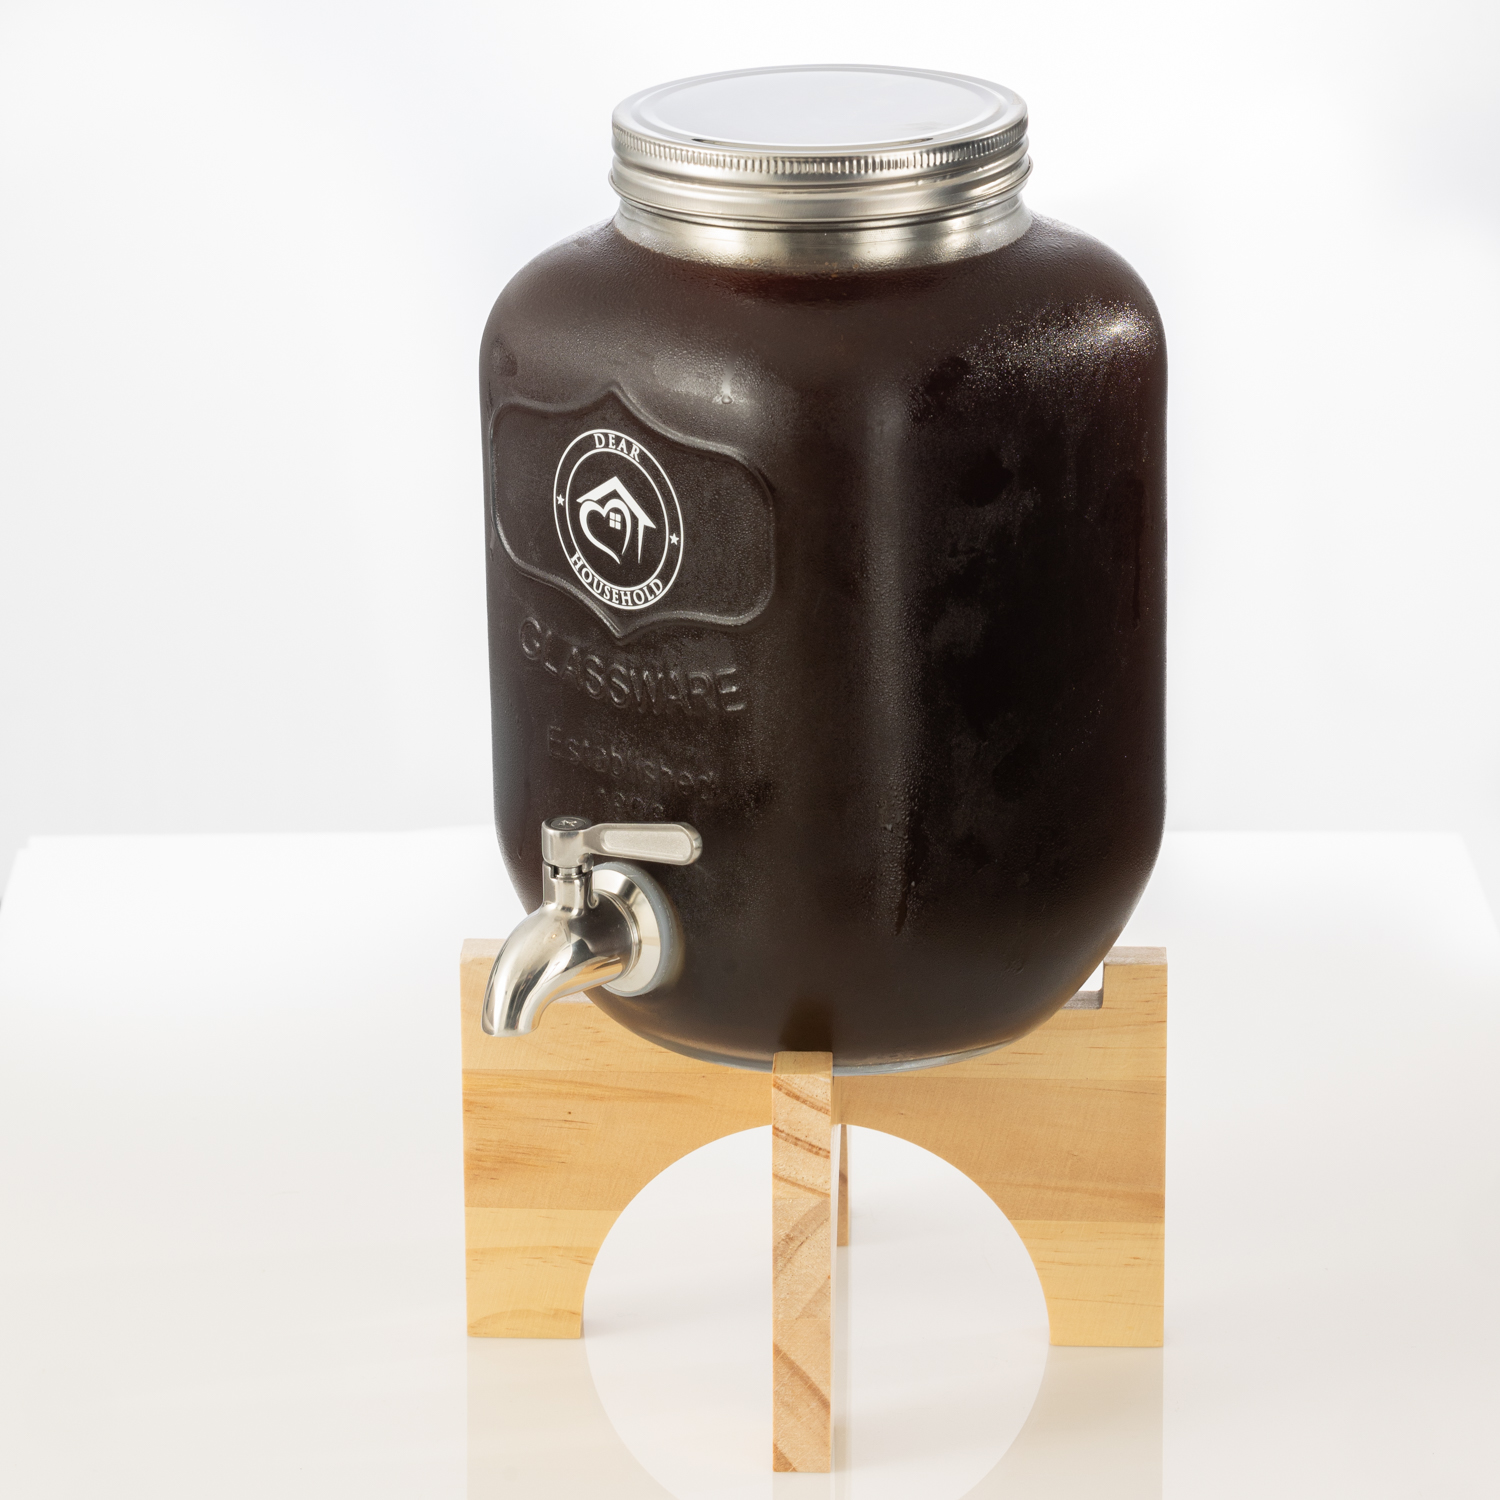 1 Gallon Cold Brew Coffee Maker With Extra-thick Glass Carafe